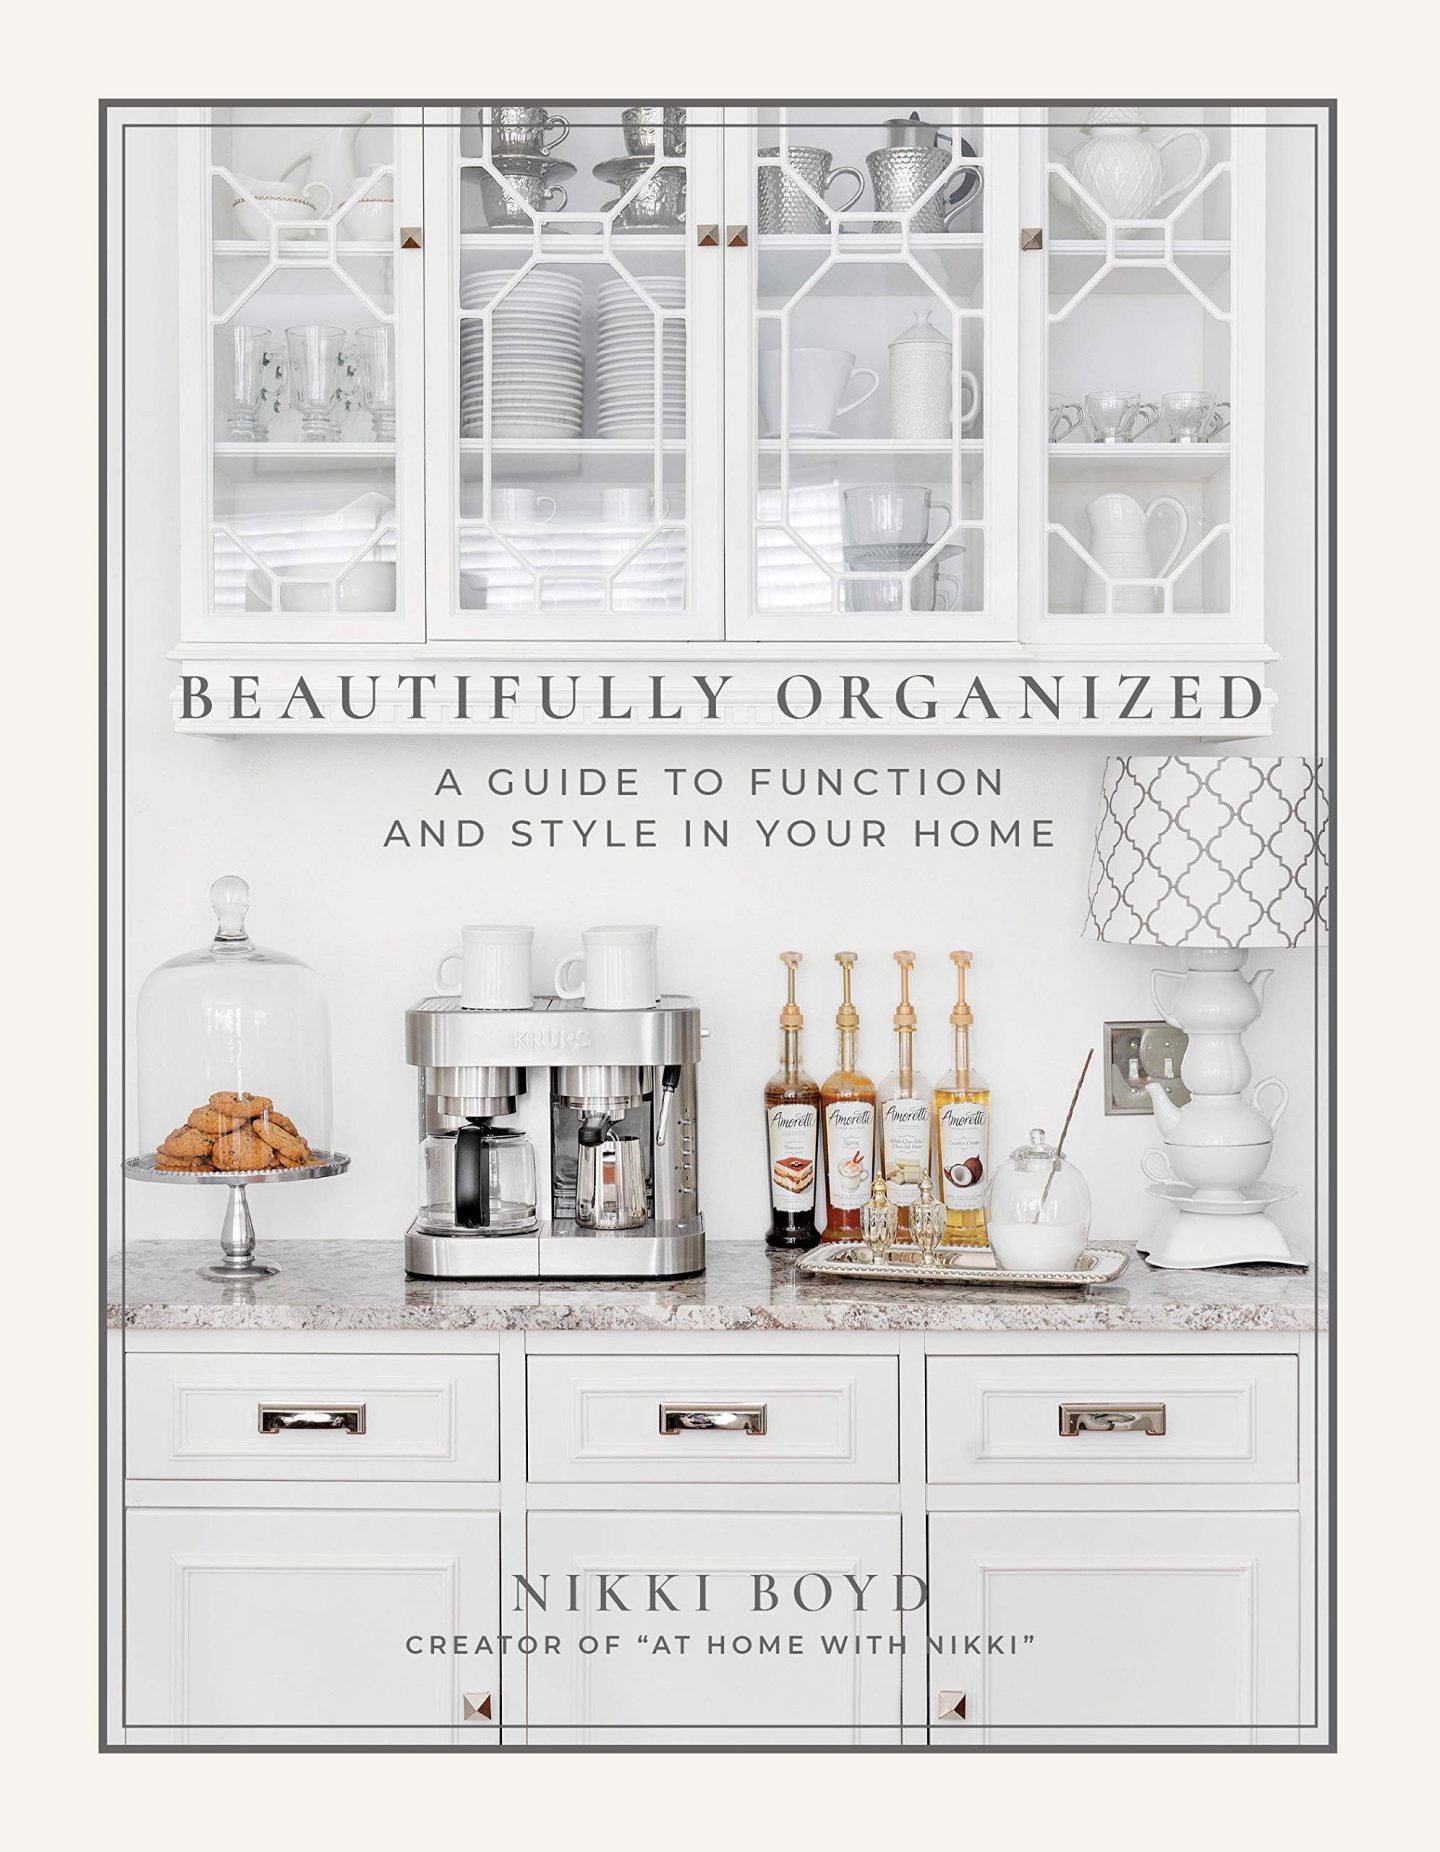 The book cover for Beautifully Organized by Nikki Boyd.